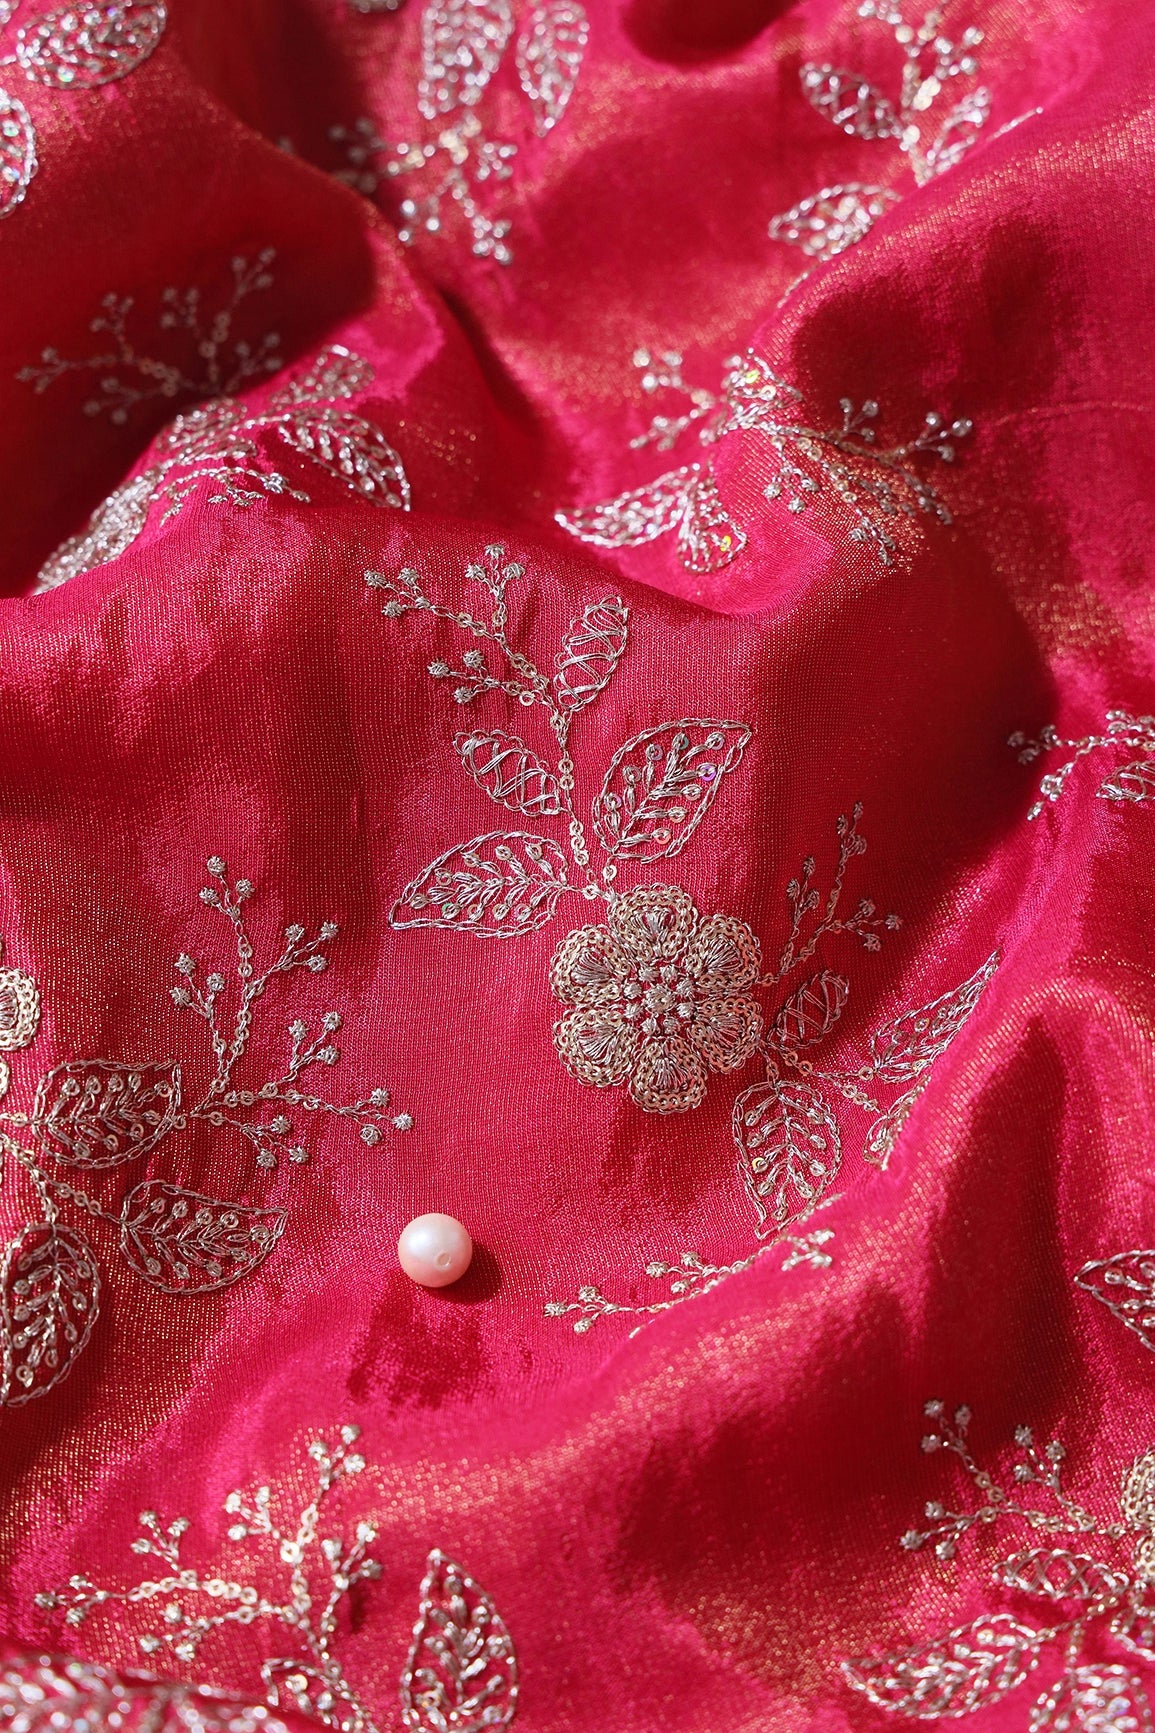 Gold Sequins And Zari Floral Embroidery Work On Cerise Pink Pure Viscose Zari Tissue Fabric